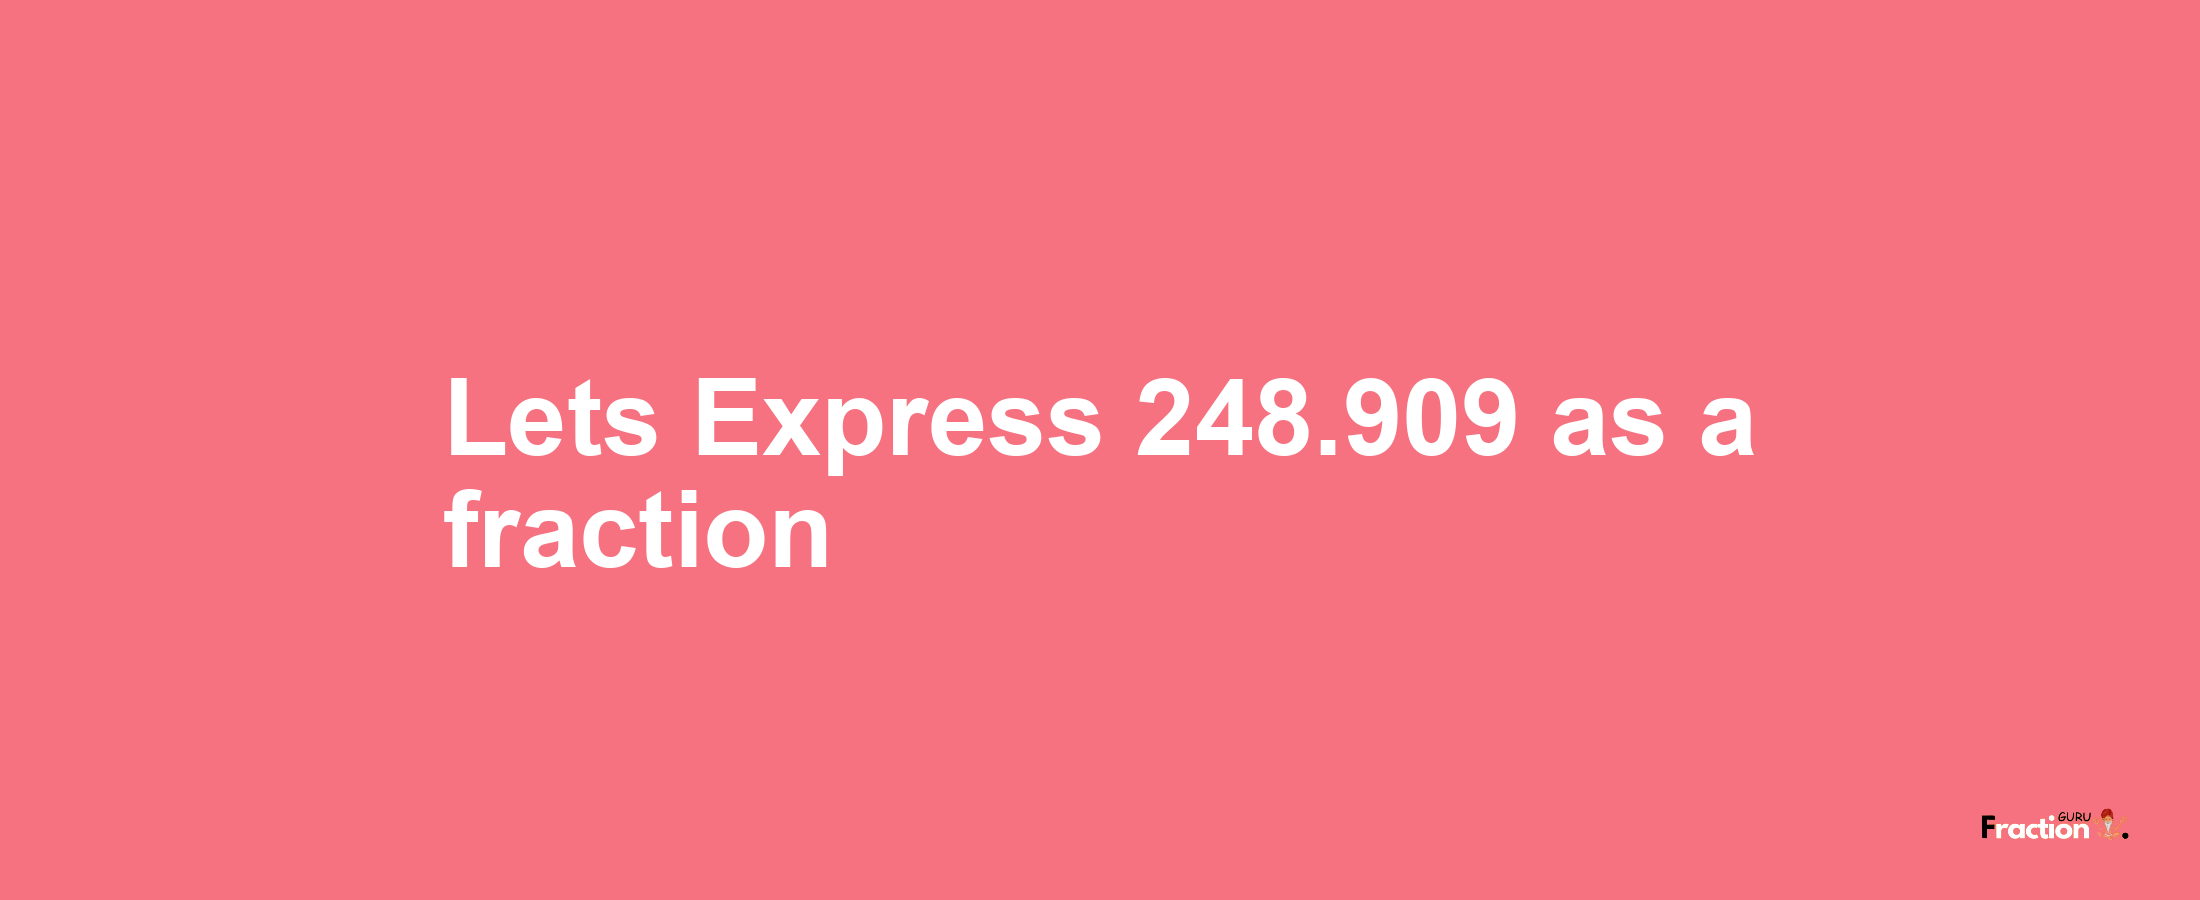 Lets Express 248.909 as afraction